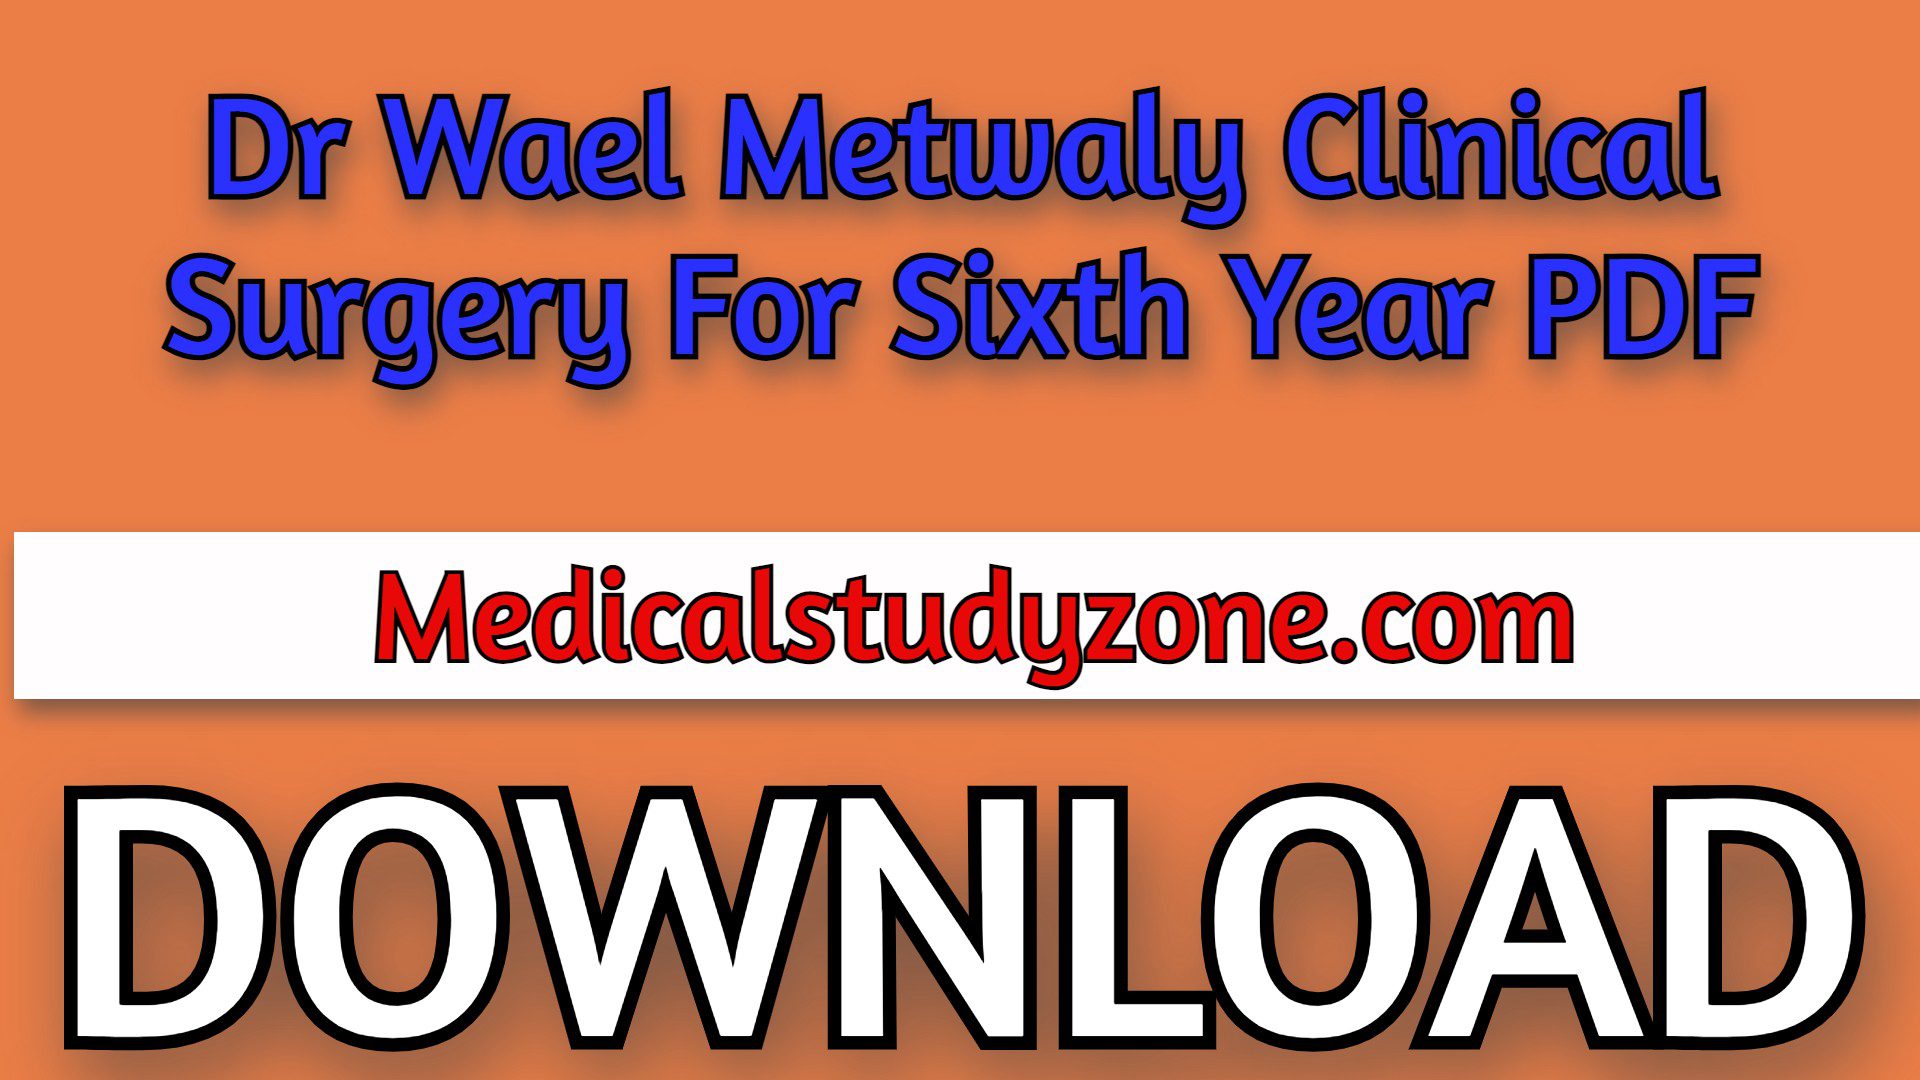 Dr Wael Metwaly Clinical Surgery For Sixth Year PDF Free Download